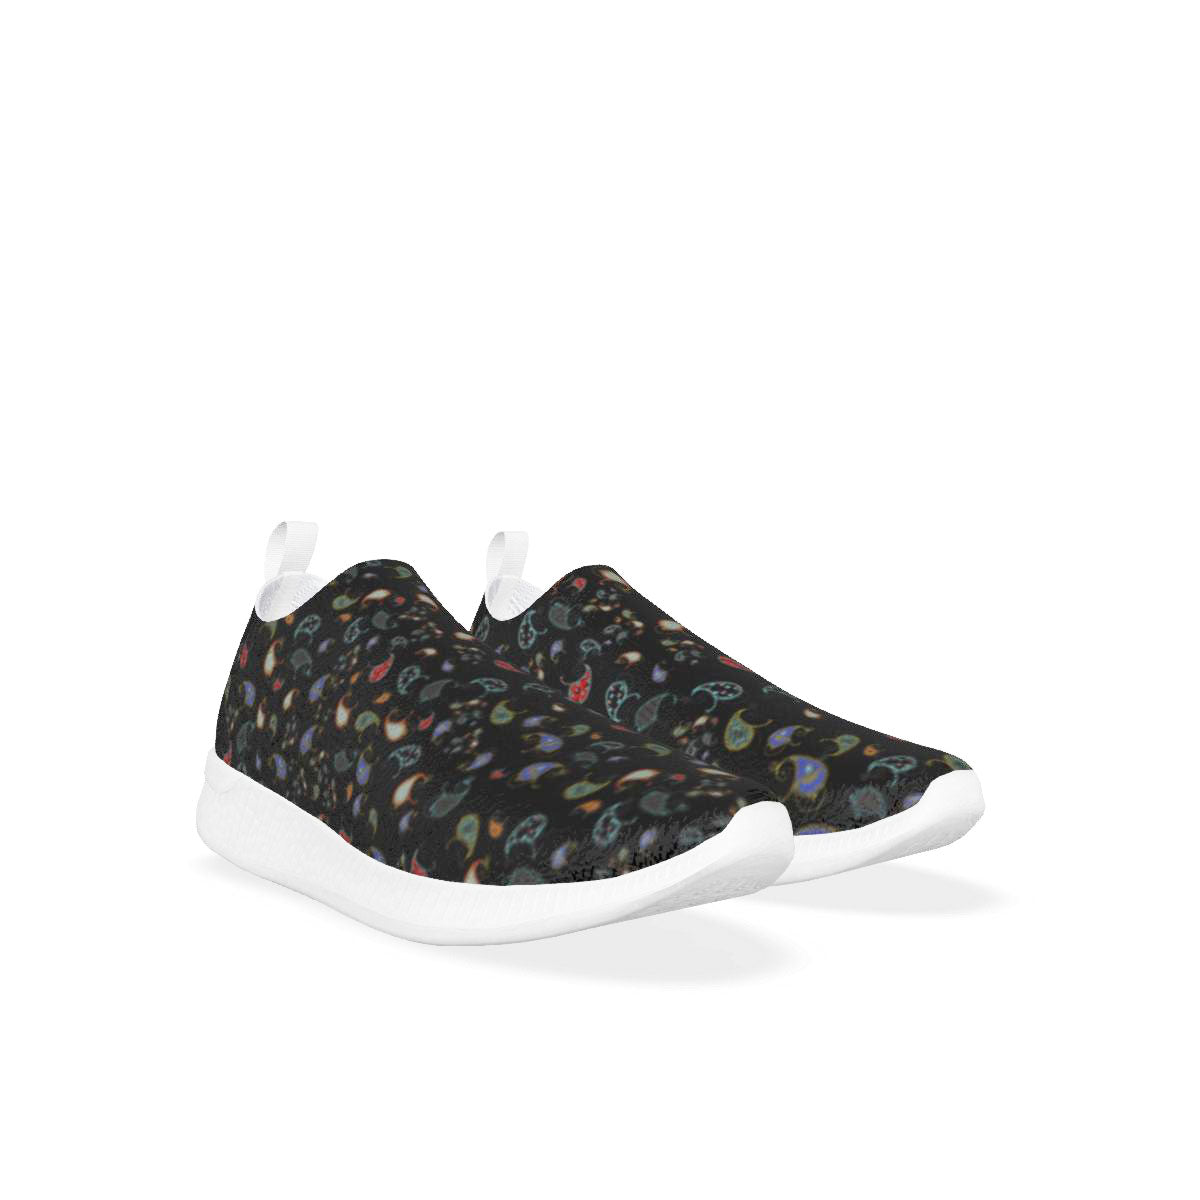 Pasley Park Two All-Over Print Man's Flying Woven Running Shoes